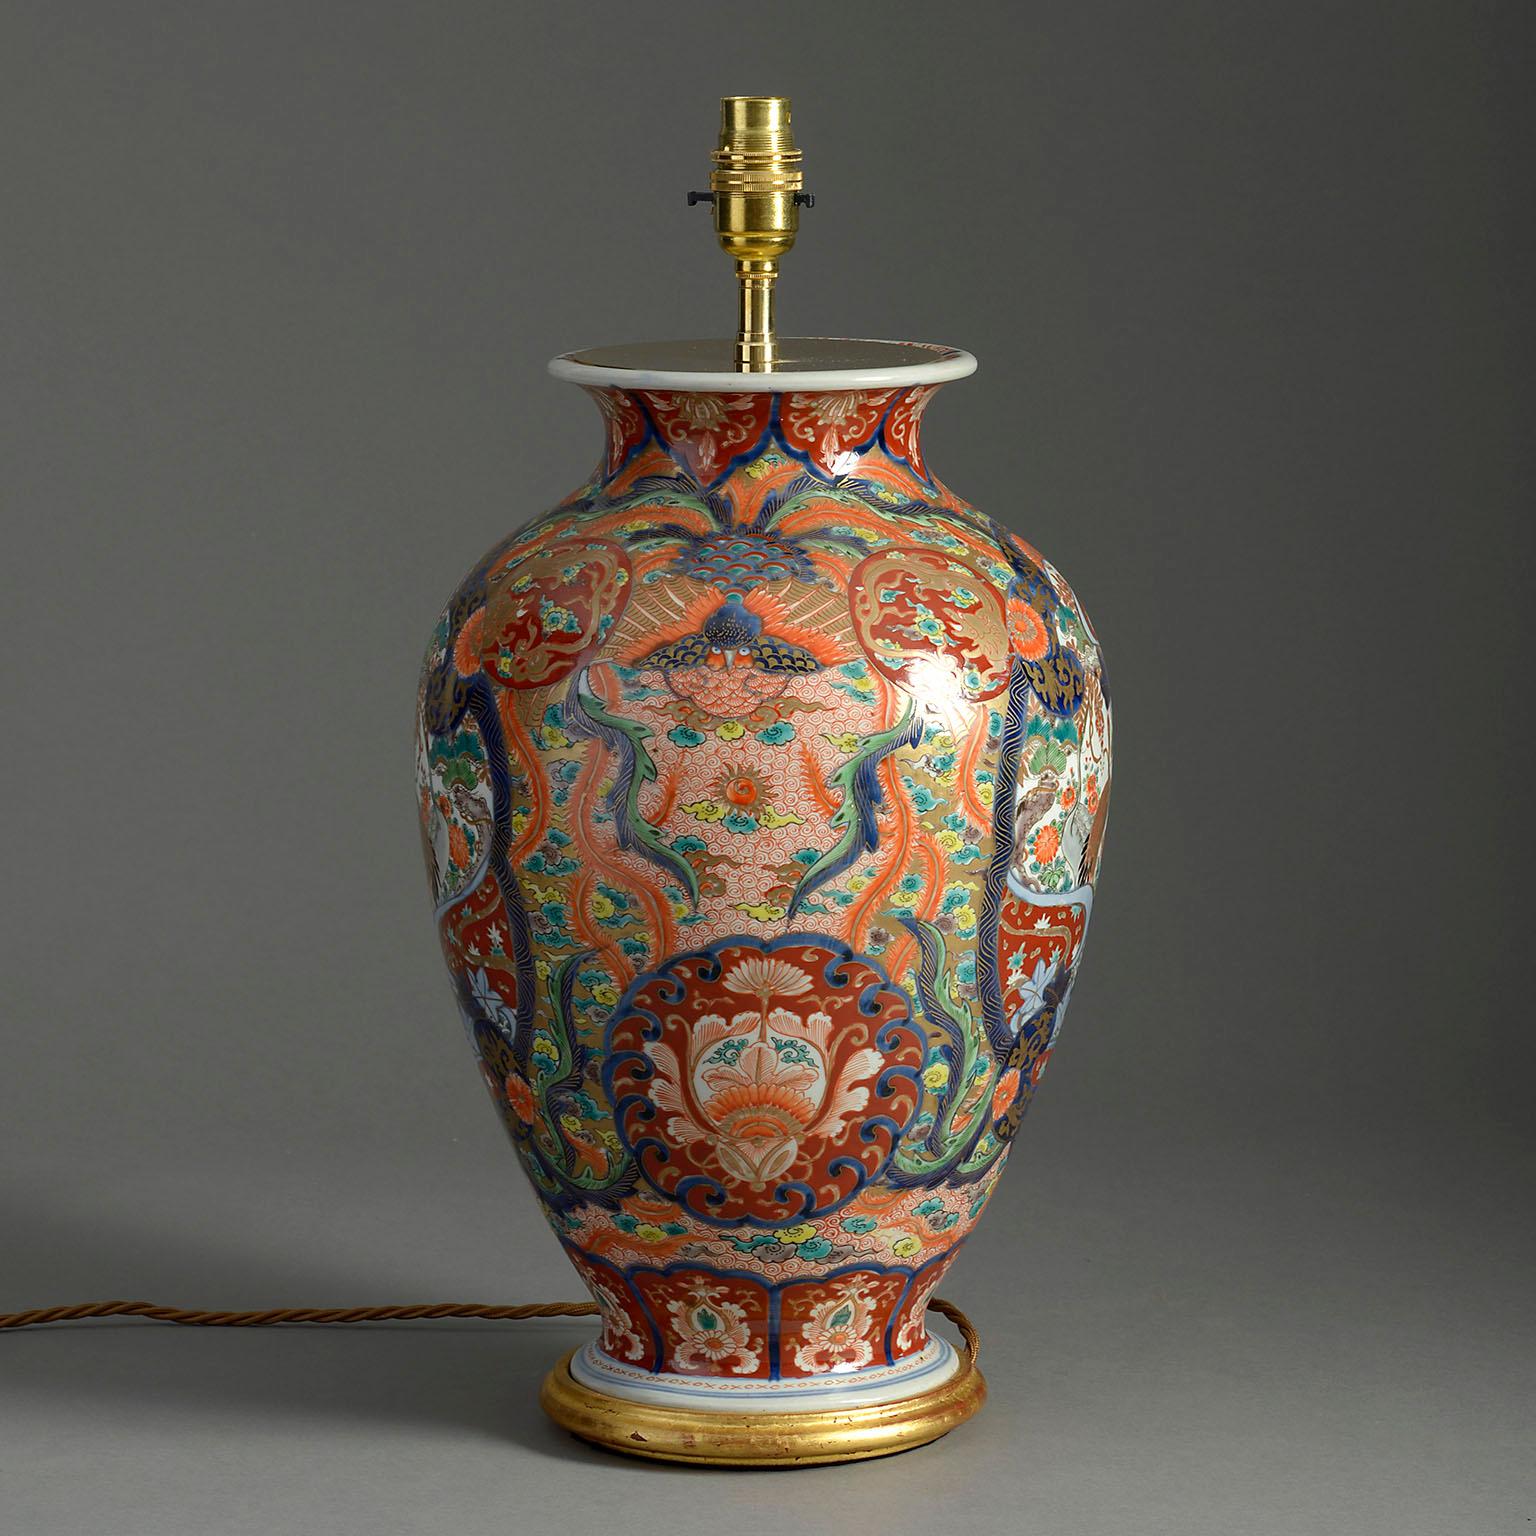 A late nineteenth century Meiji Period Imari vase, decorated in the traditional manner with flowers, foliage and bird in rich red, blue, green and gold glazes. Now mounted on a hand-turned giltwood base as a lamp.

Dimensions refer to porcelain